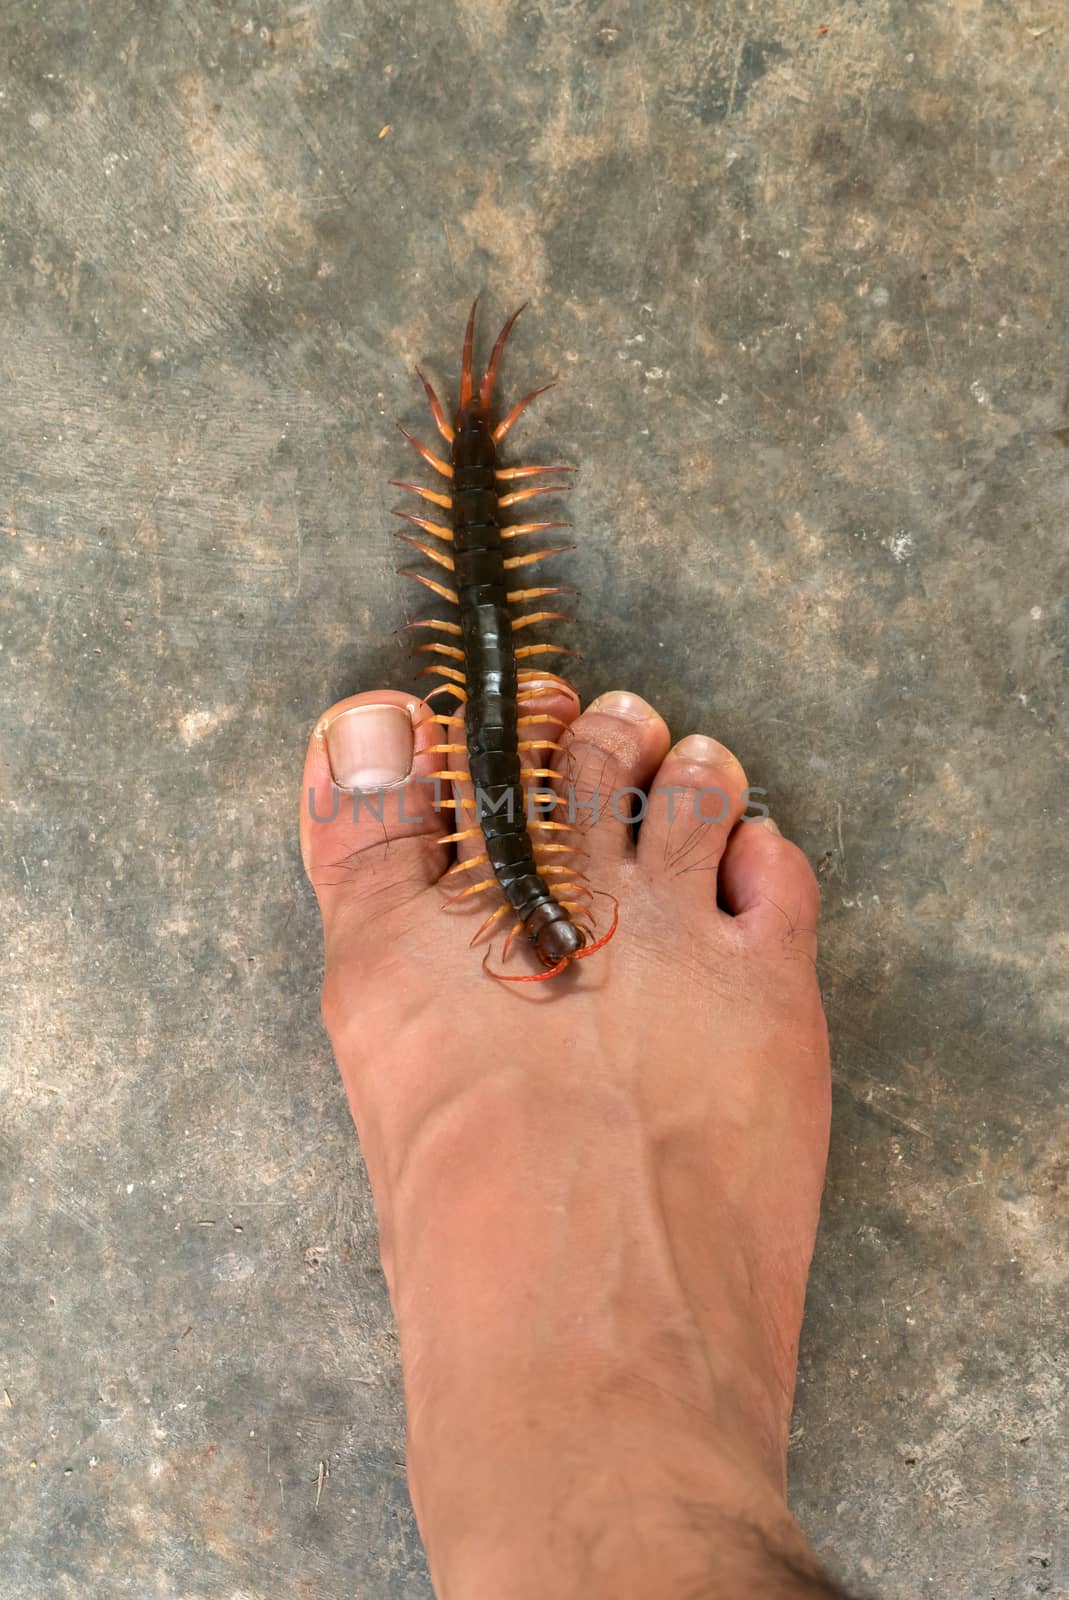 People were bitten by a centipede on feet while walking in their home